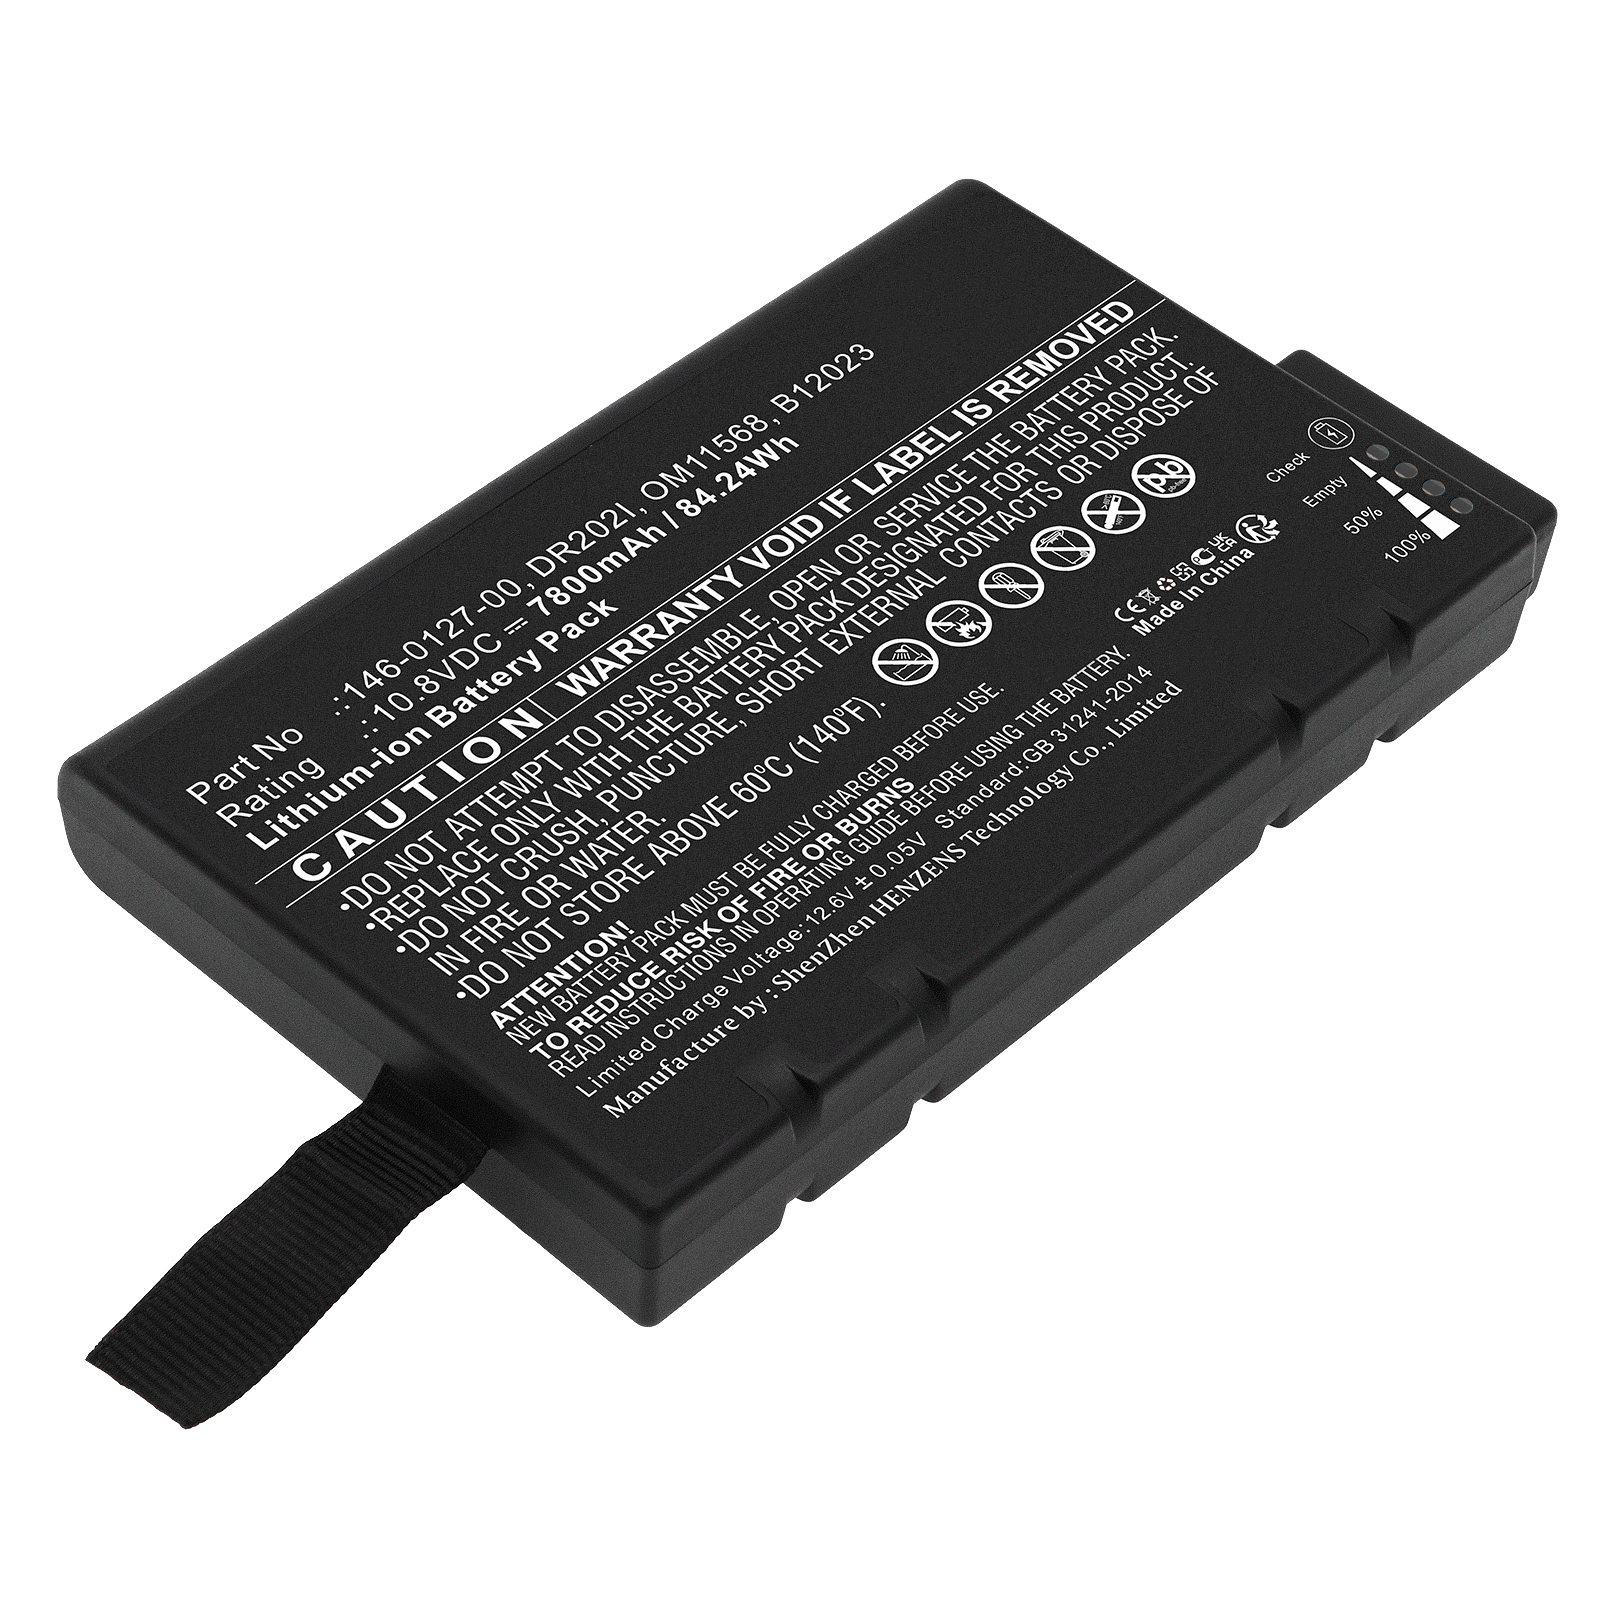 Synergy Digital Medical Battery Compatible with Spacelabs 146-0127-00 Medical Battery (Li-ion, 10.8V, 7800mAh)